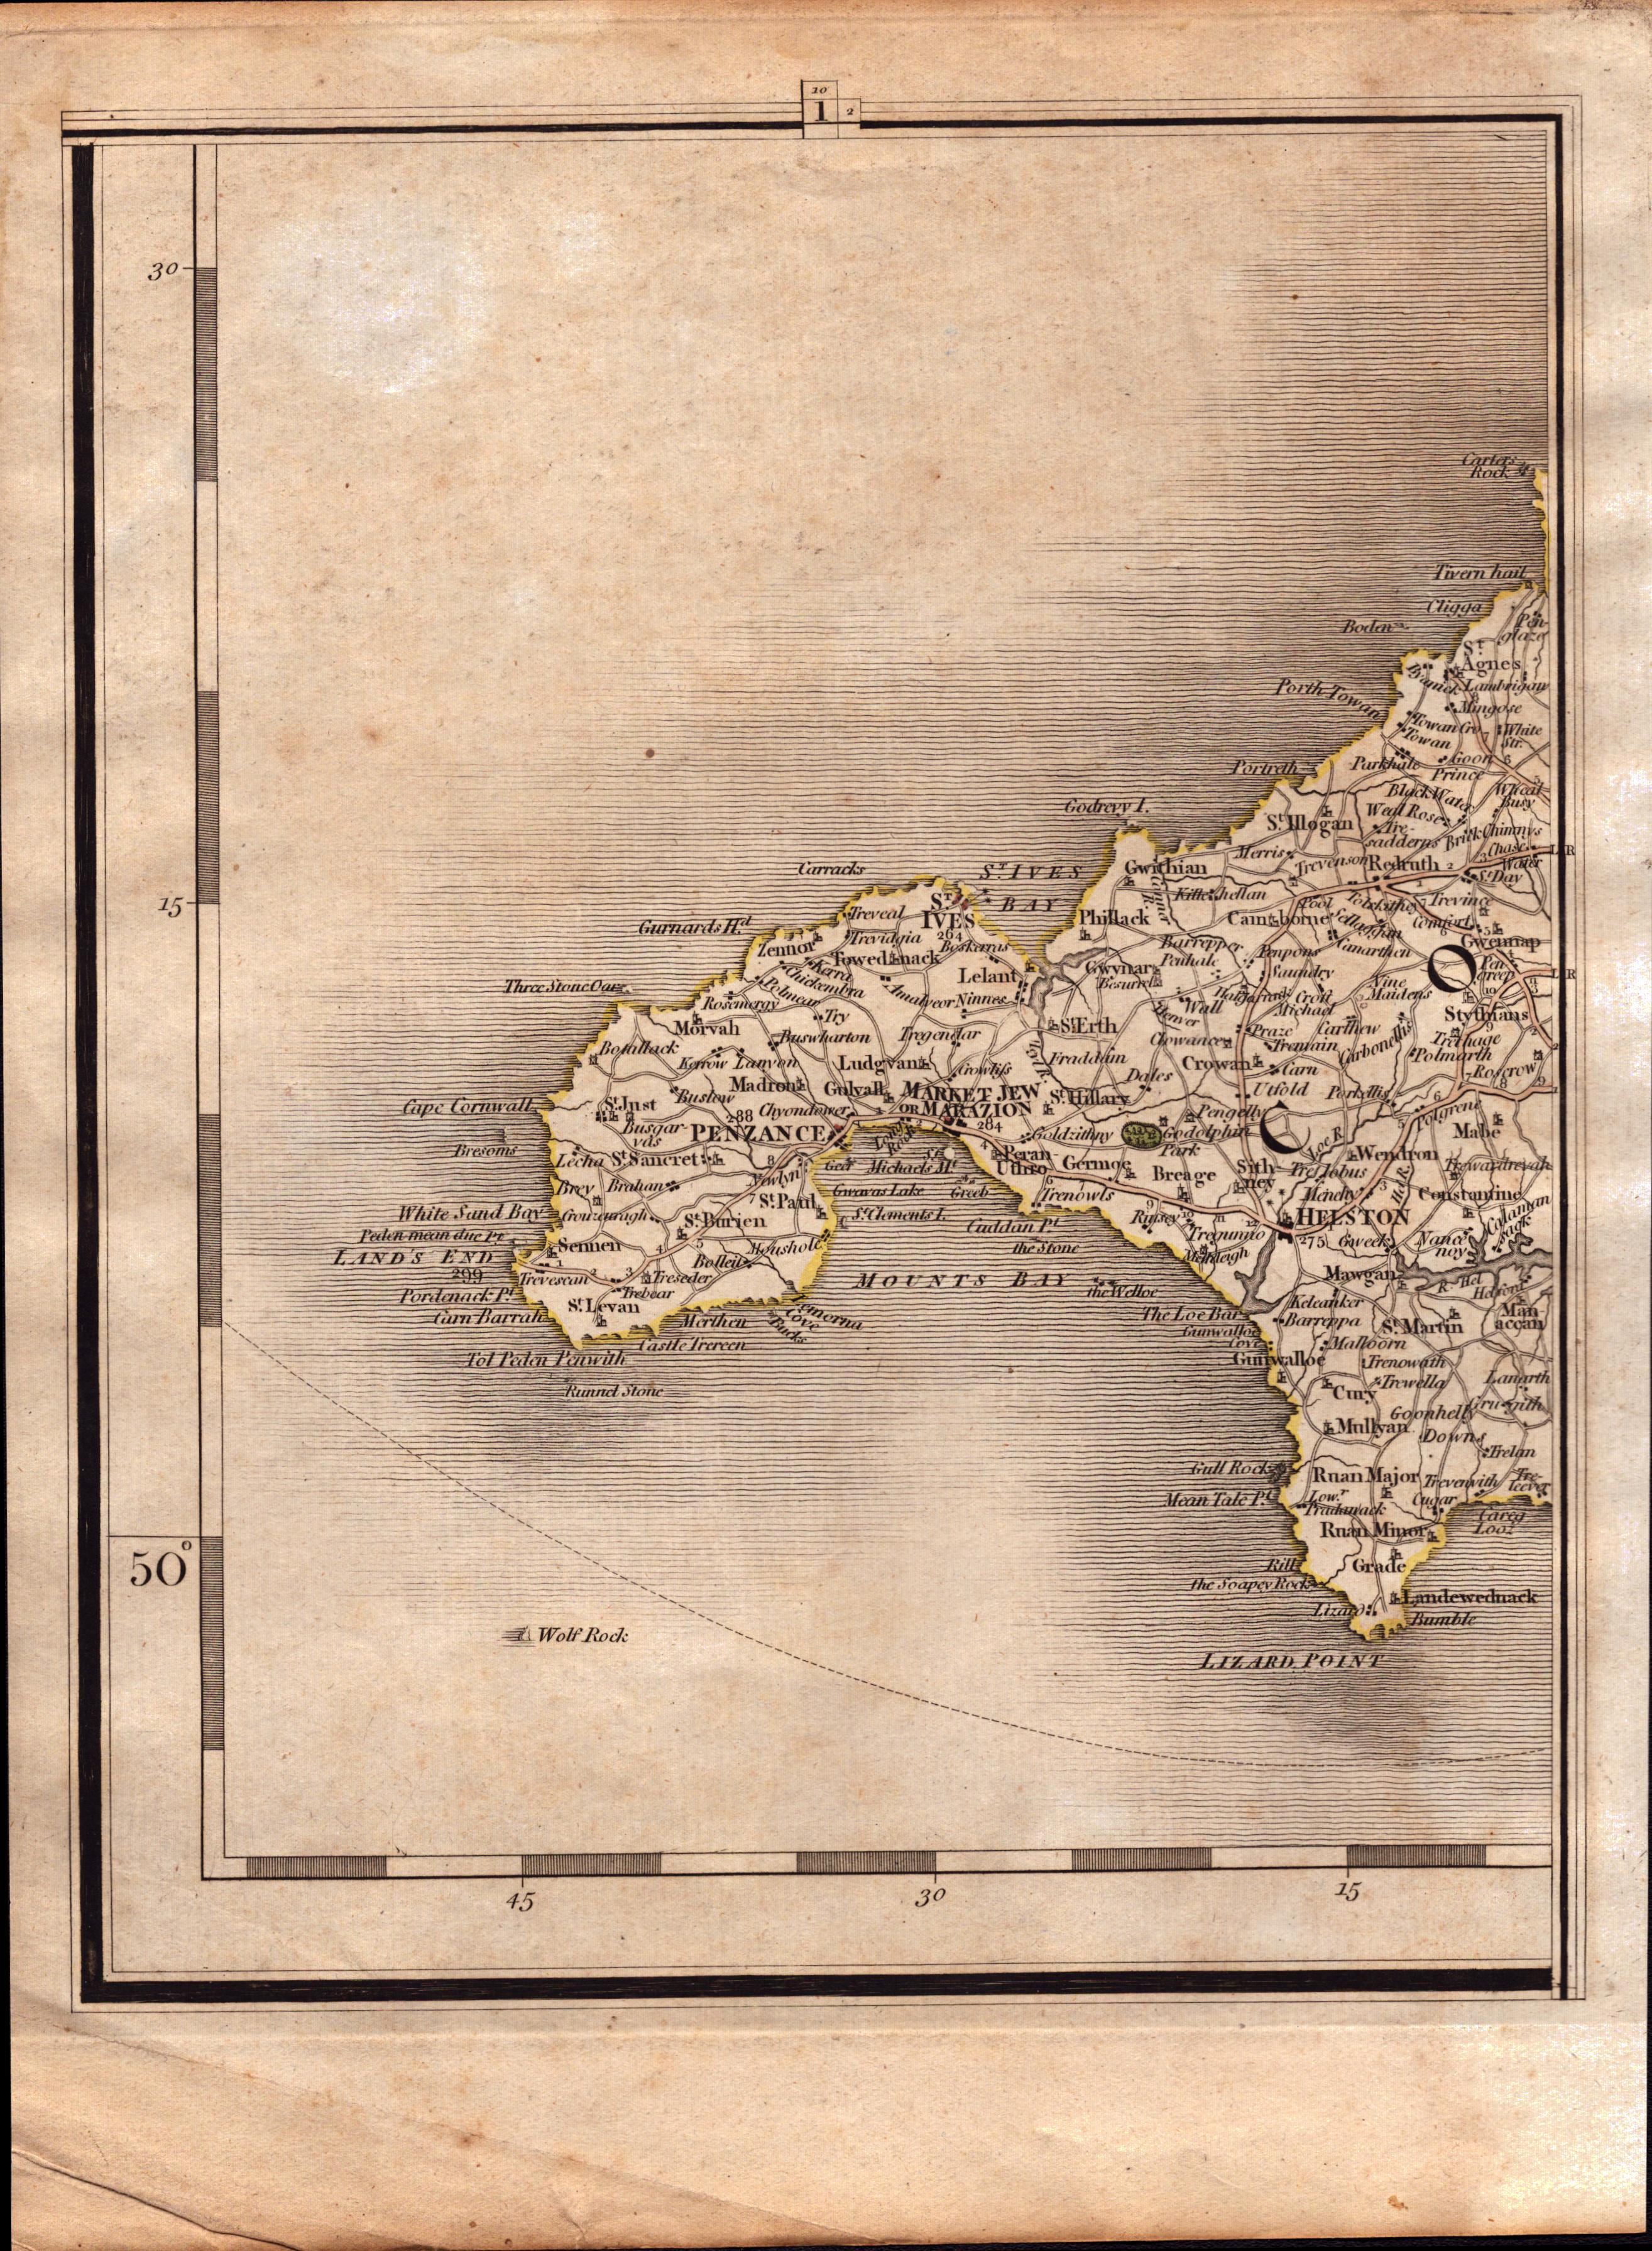 Cornwall Penzance, St Ives, Redruth, Lands’ End, John Cary’s Antique 1794 Map.